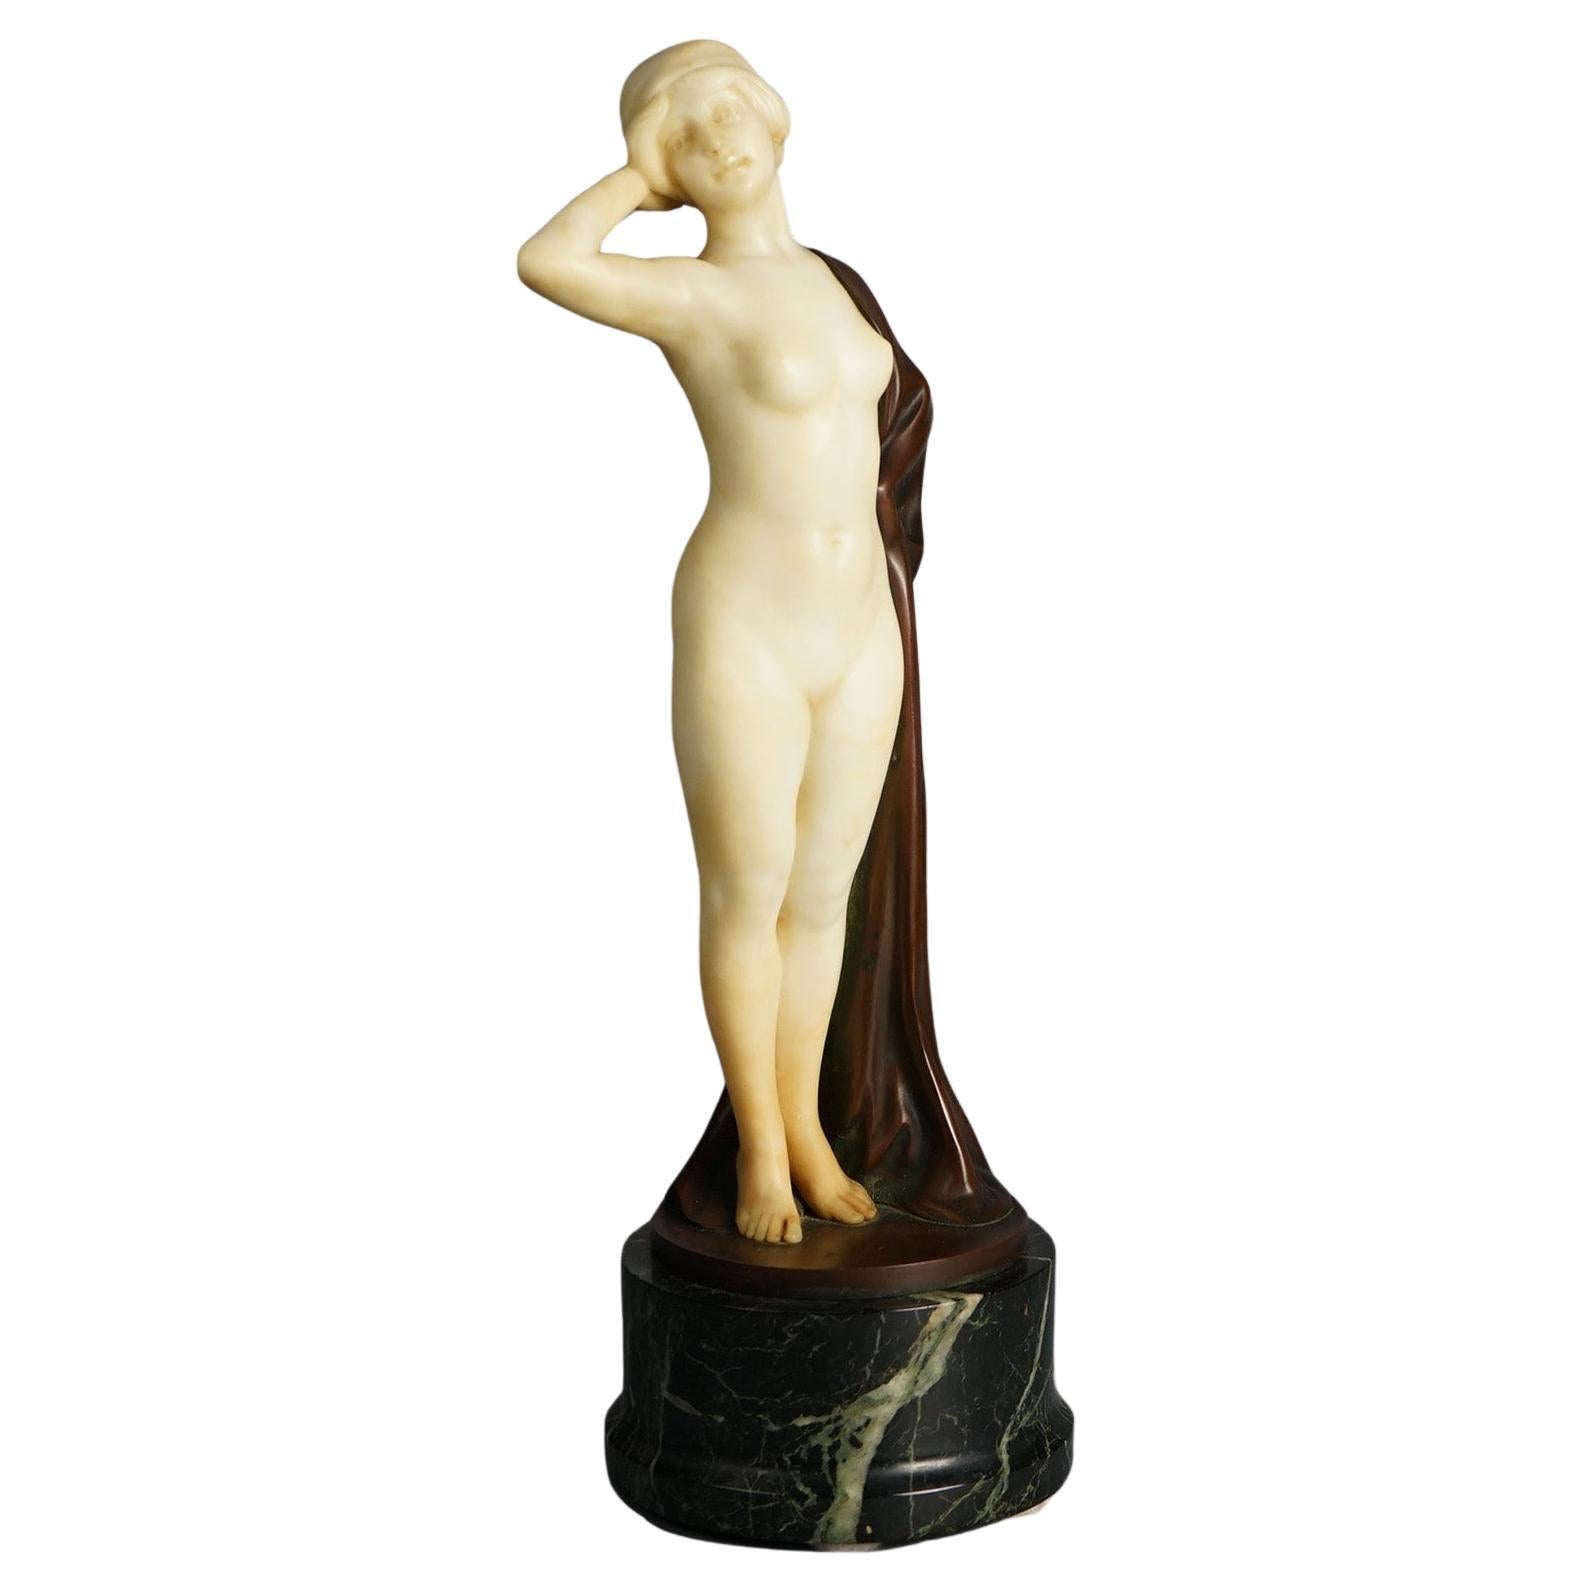 Rizec Signed Alabaster Bronze & Marble Sculpture of a Woman by Schumacher C1920 For Sale